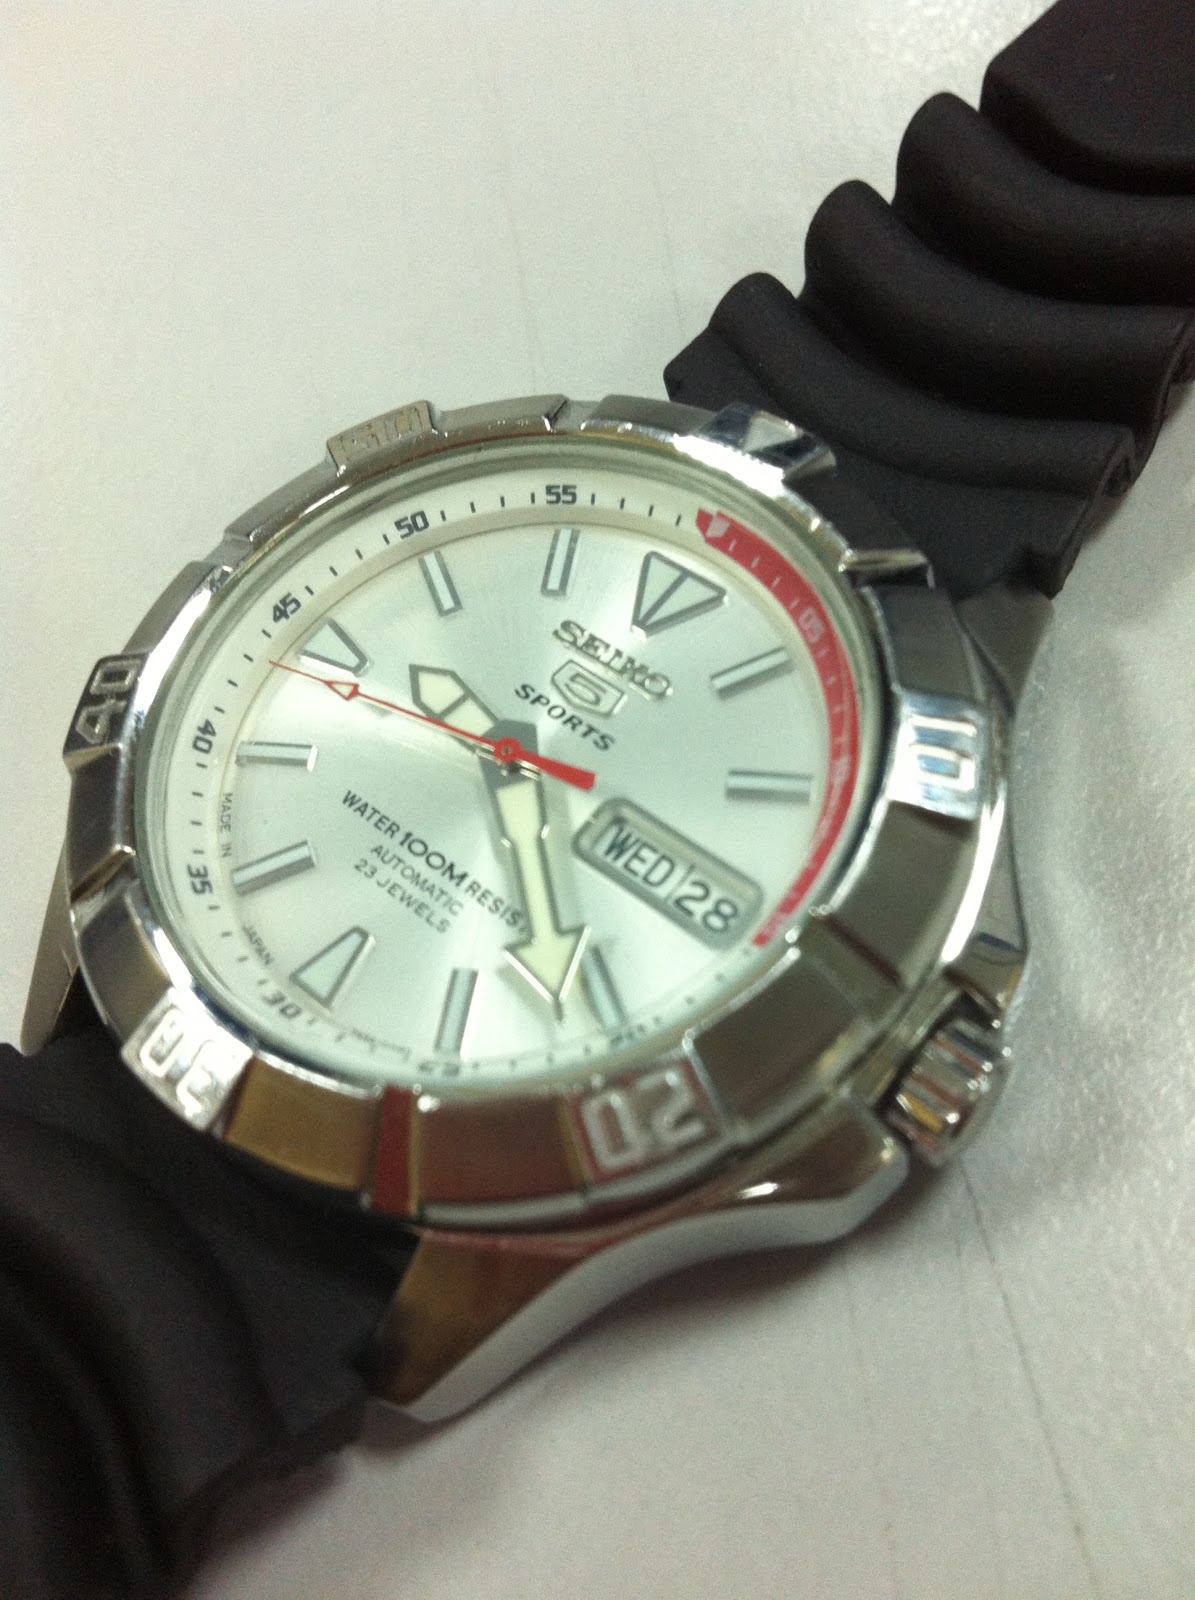 The good - Made in Japan Seiko 5